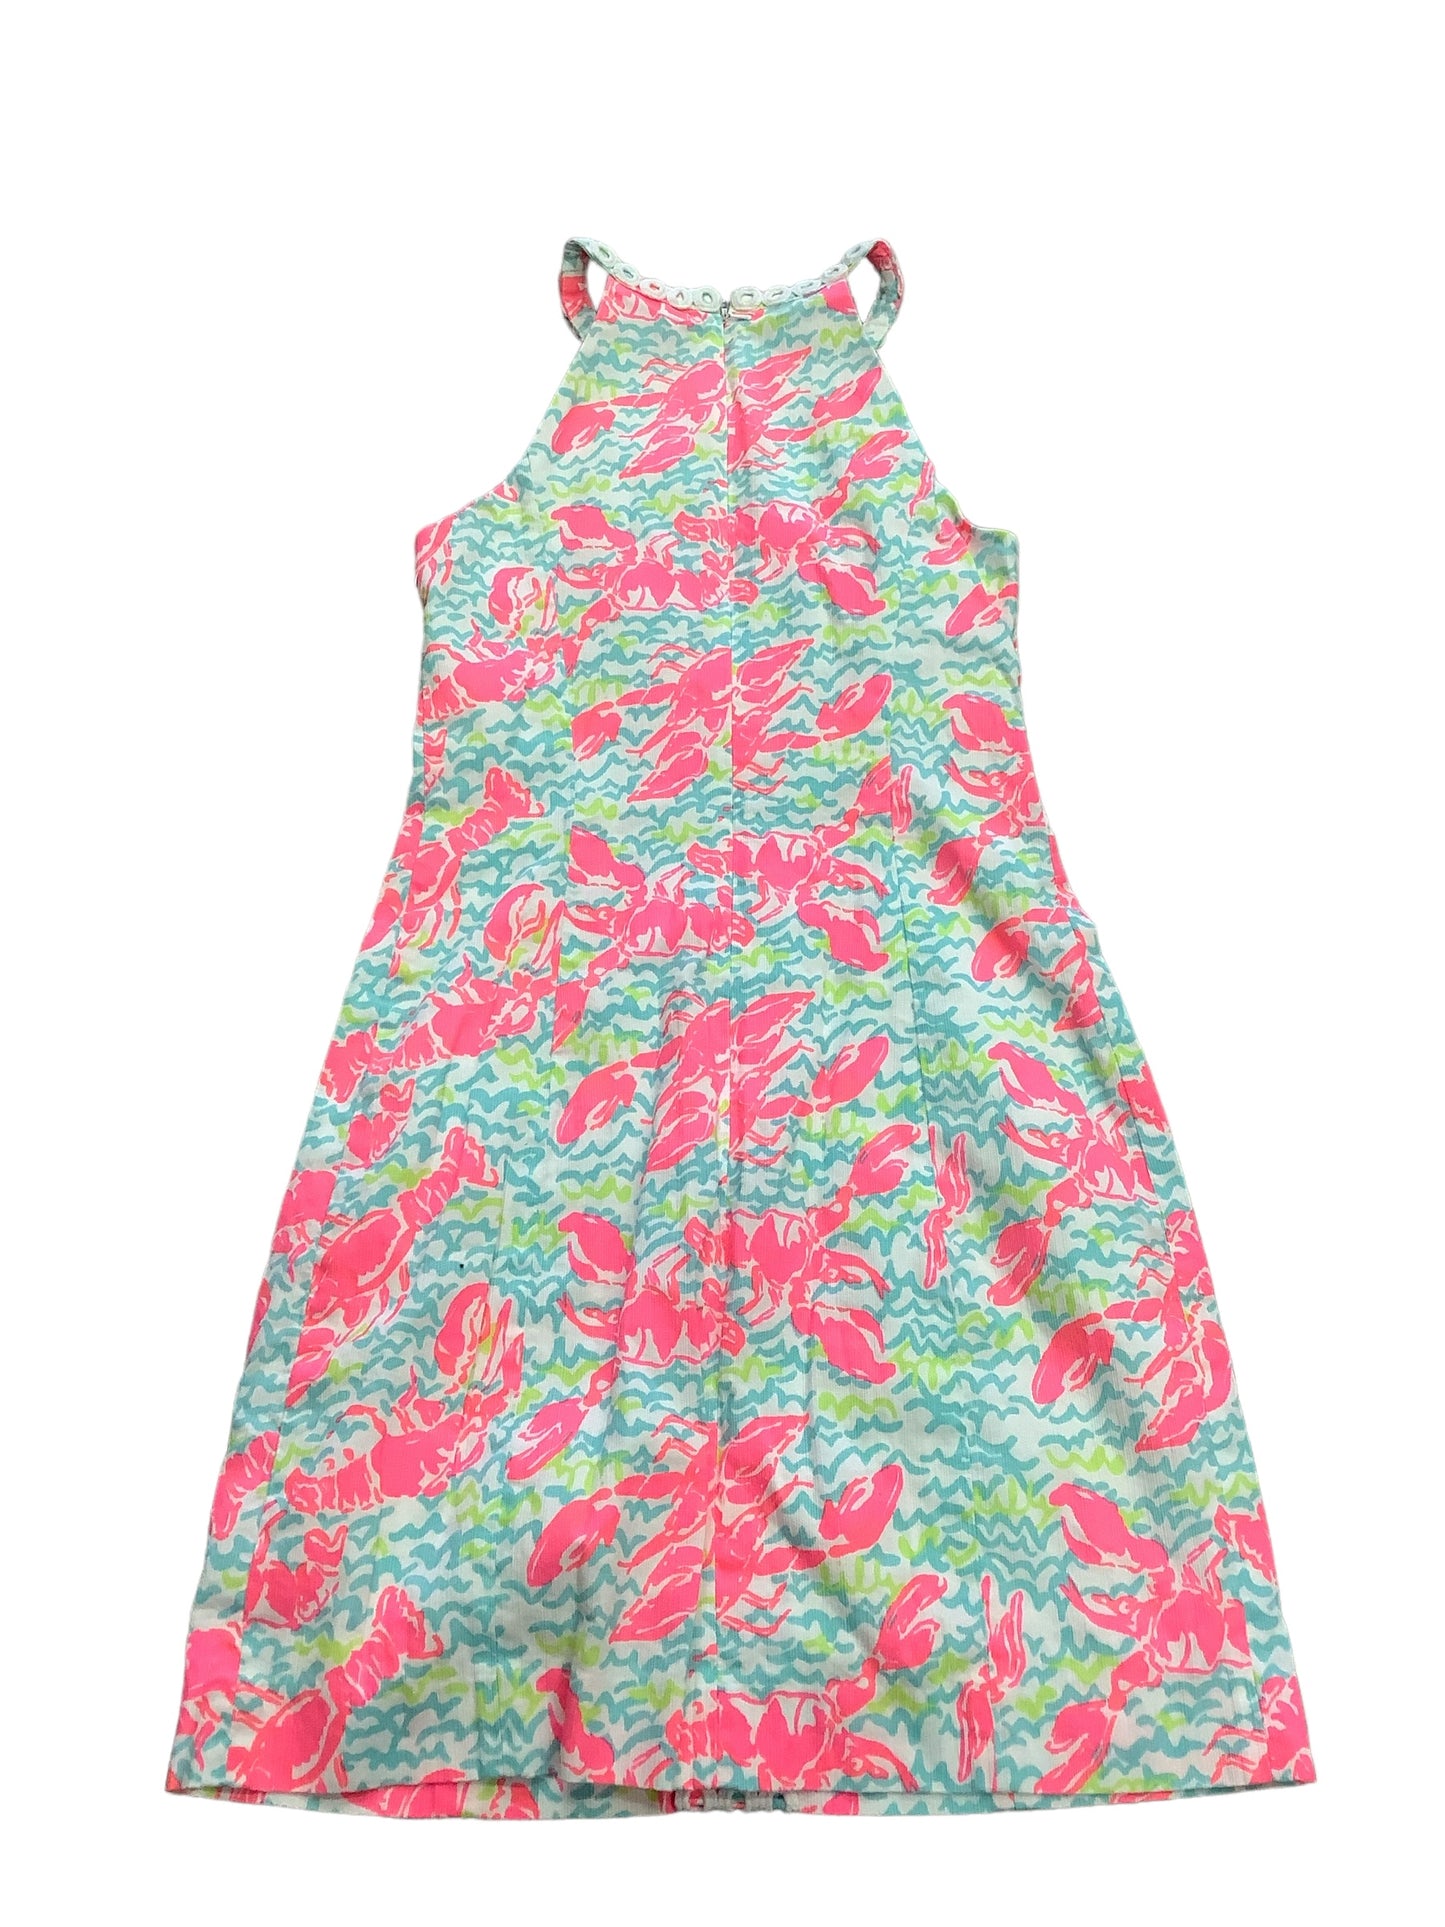 Dress Designer By Lilly Pulitzer  Size: 00